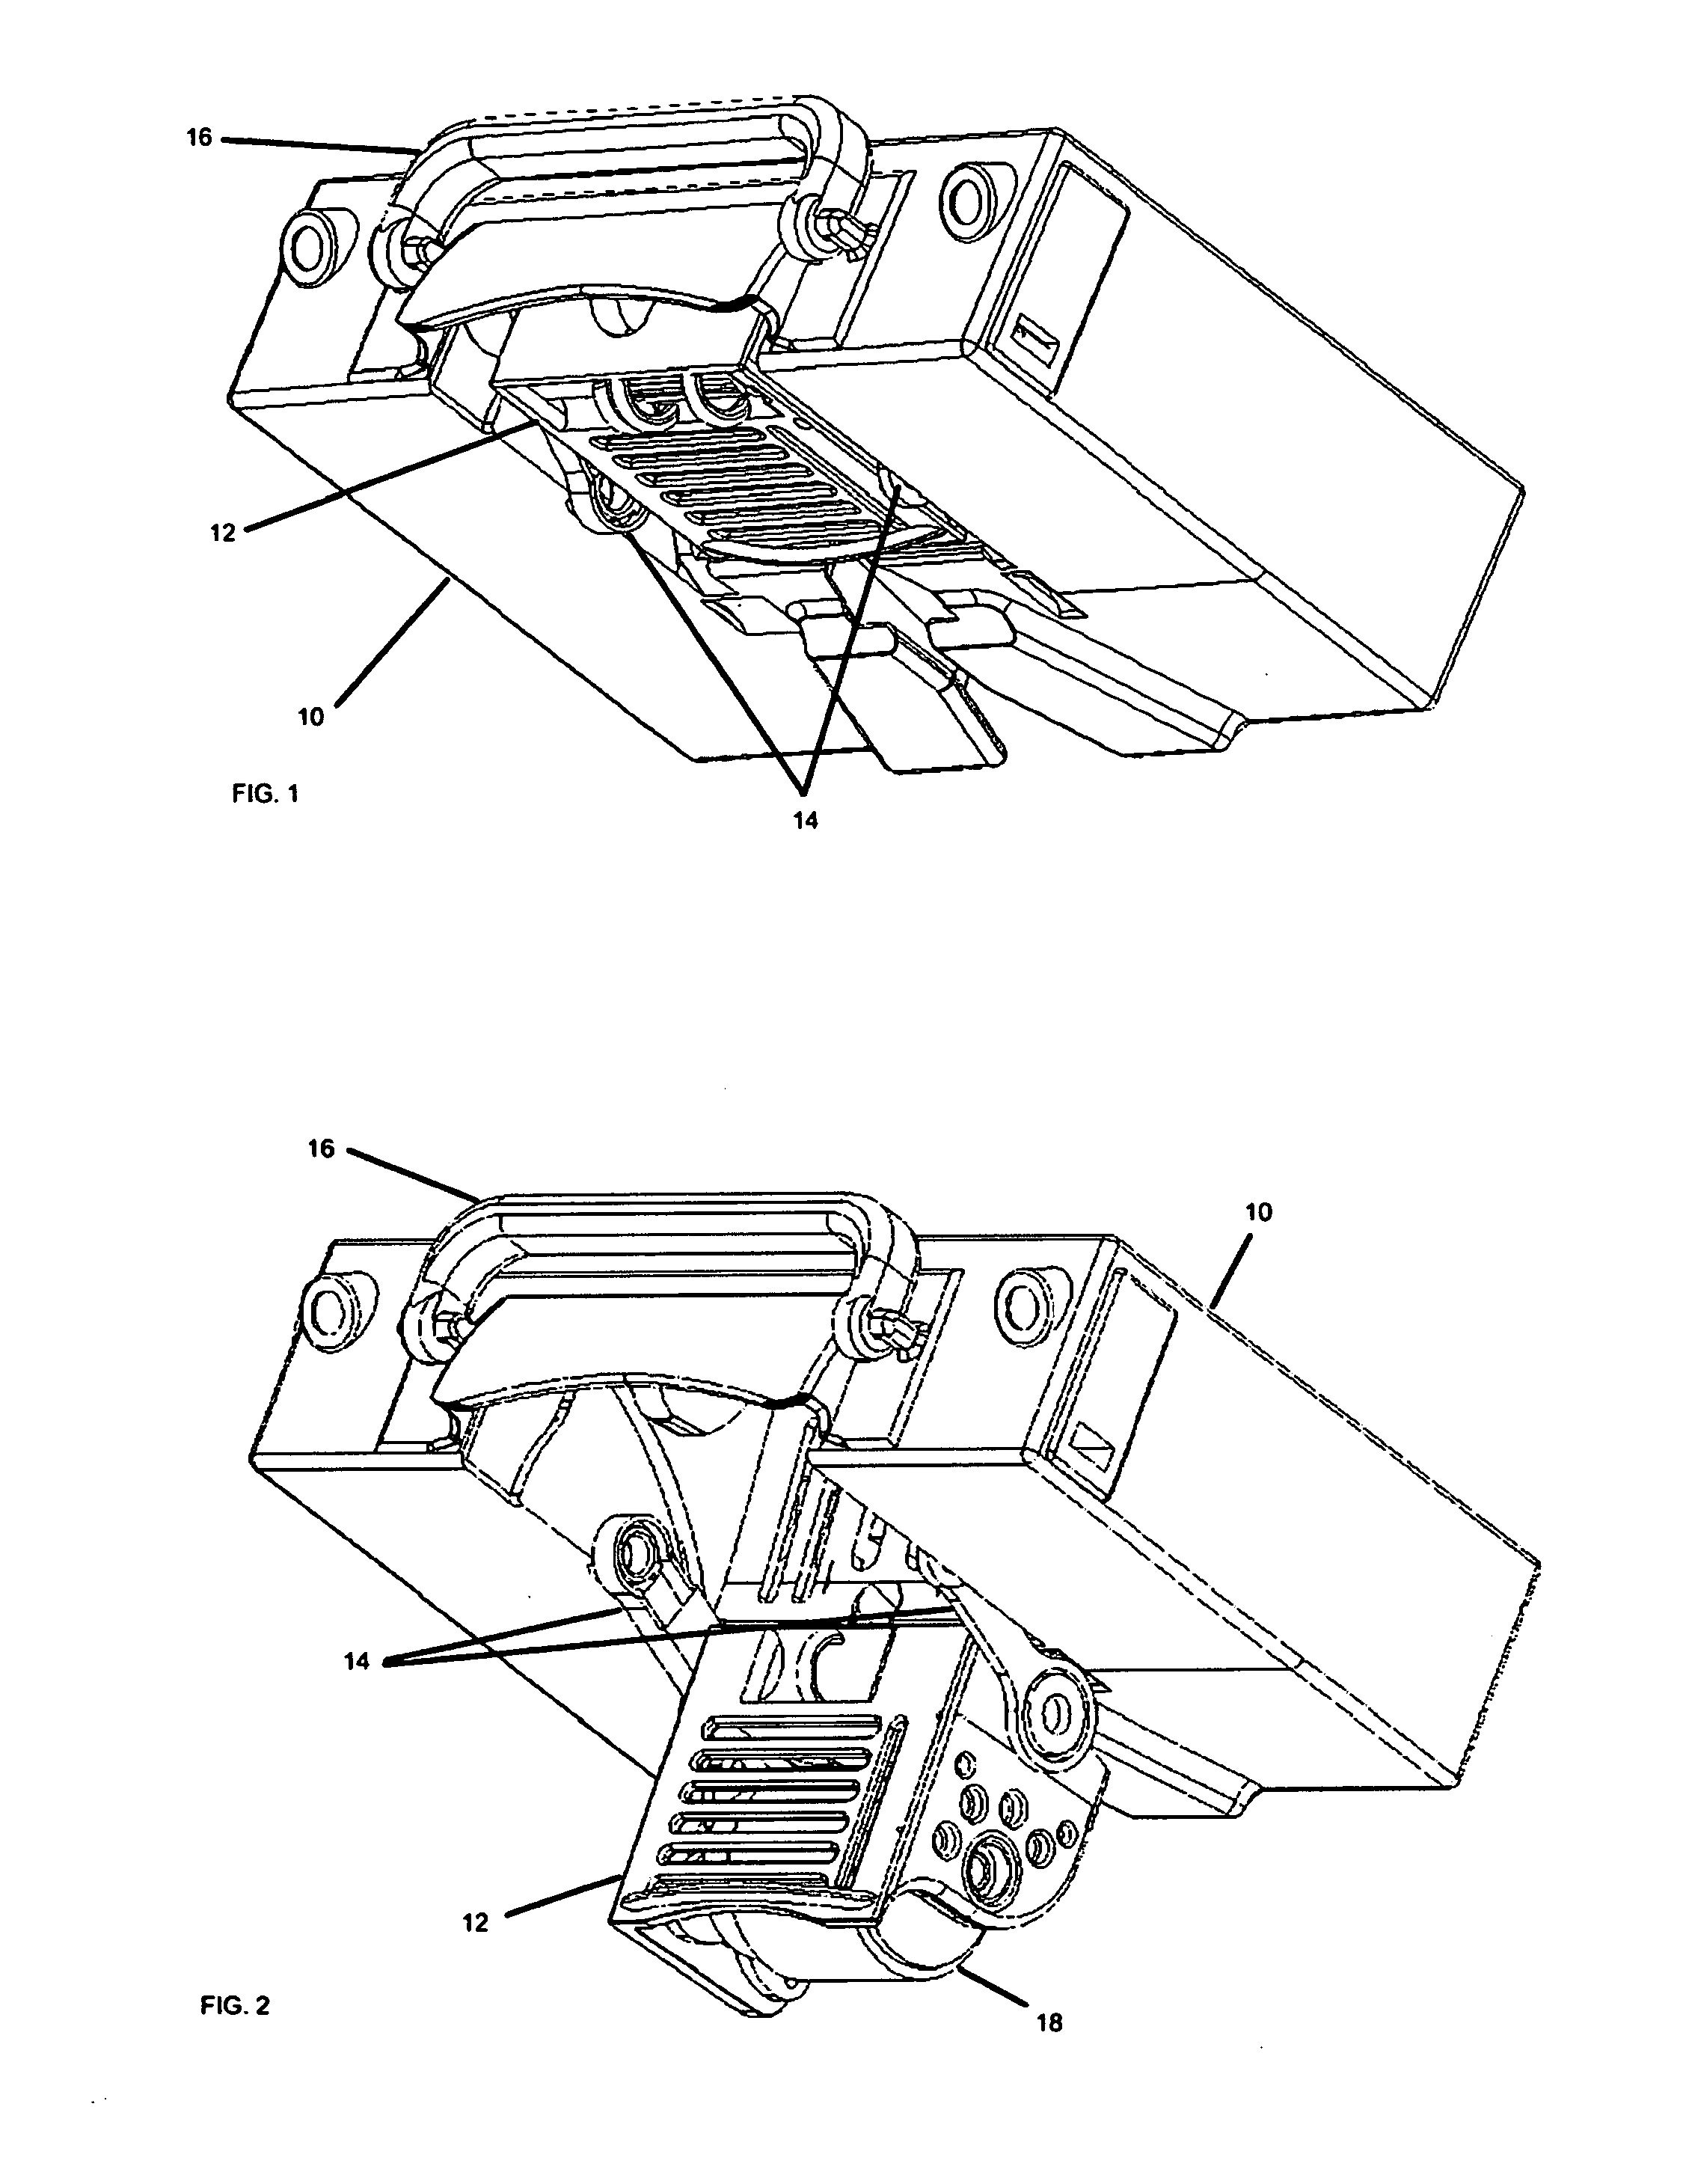 Portable Multi-Platform Friction Drive System with Retractable Motor Drive Assembly